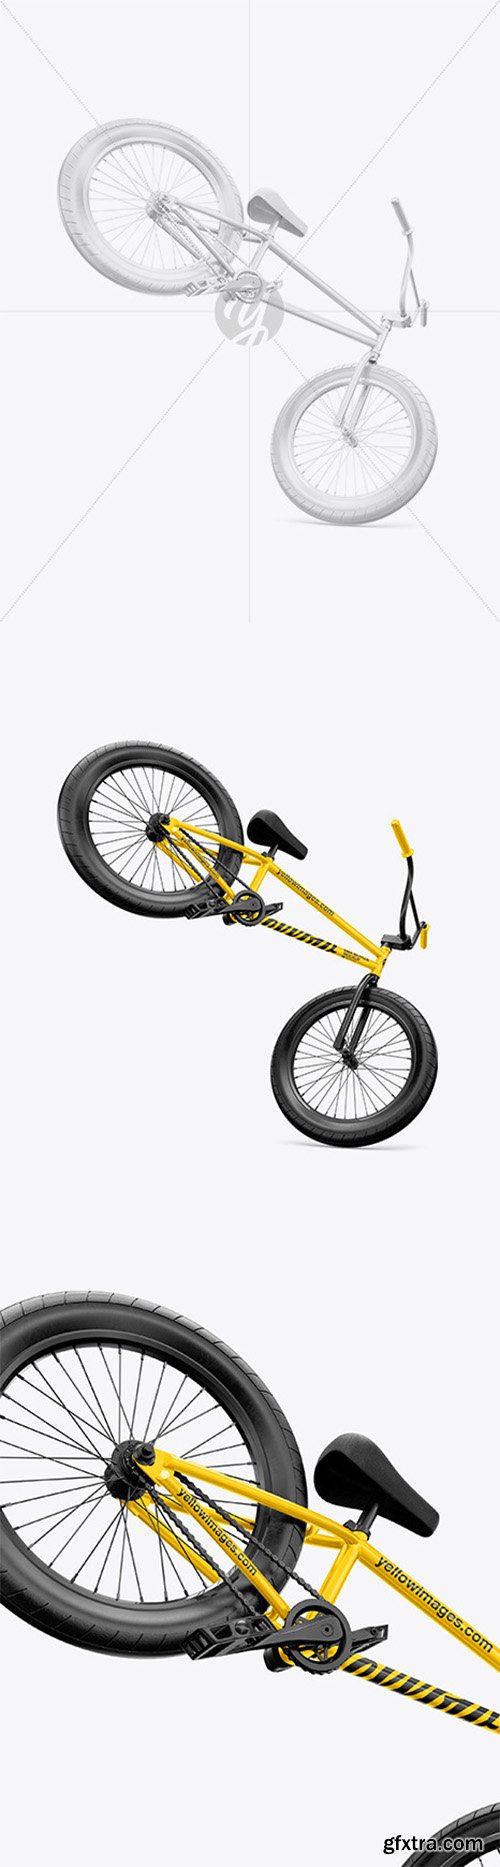 BMX Bicycle Mockup - Right Side View 65230